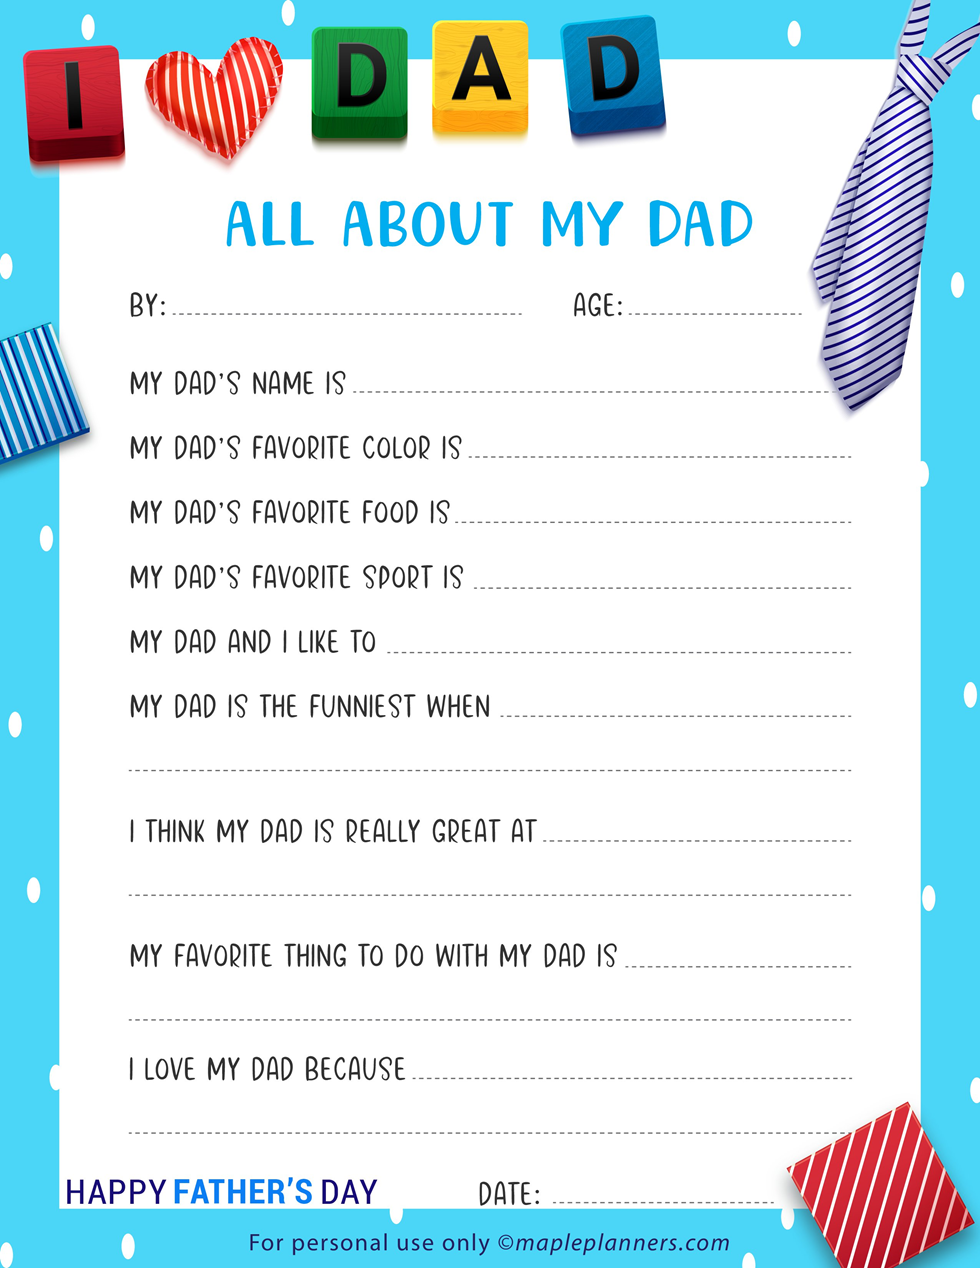 All about my dad Father's Day Printables